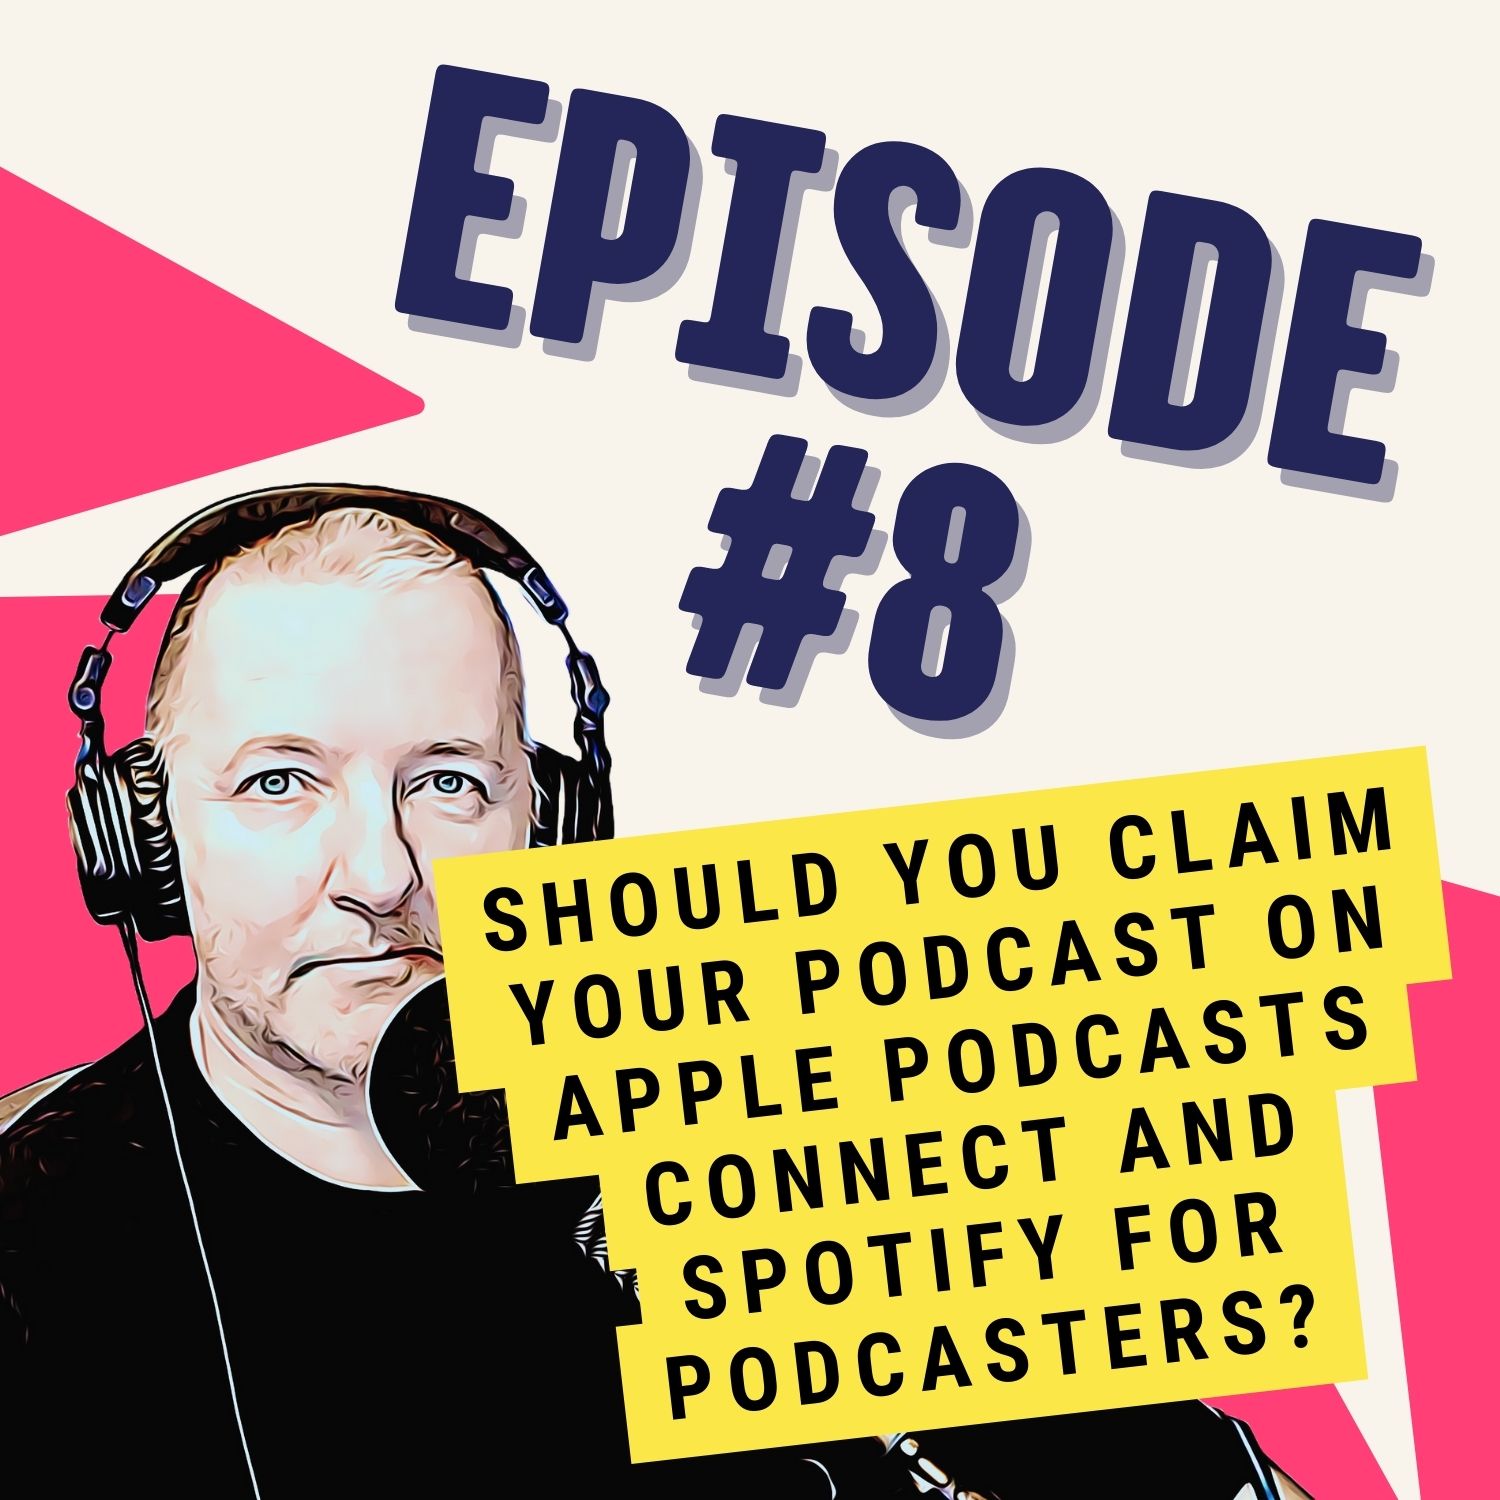 Should You Claim Your Podcast on Apple Podcasts Connect and Spotify for Podcasters?